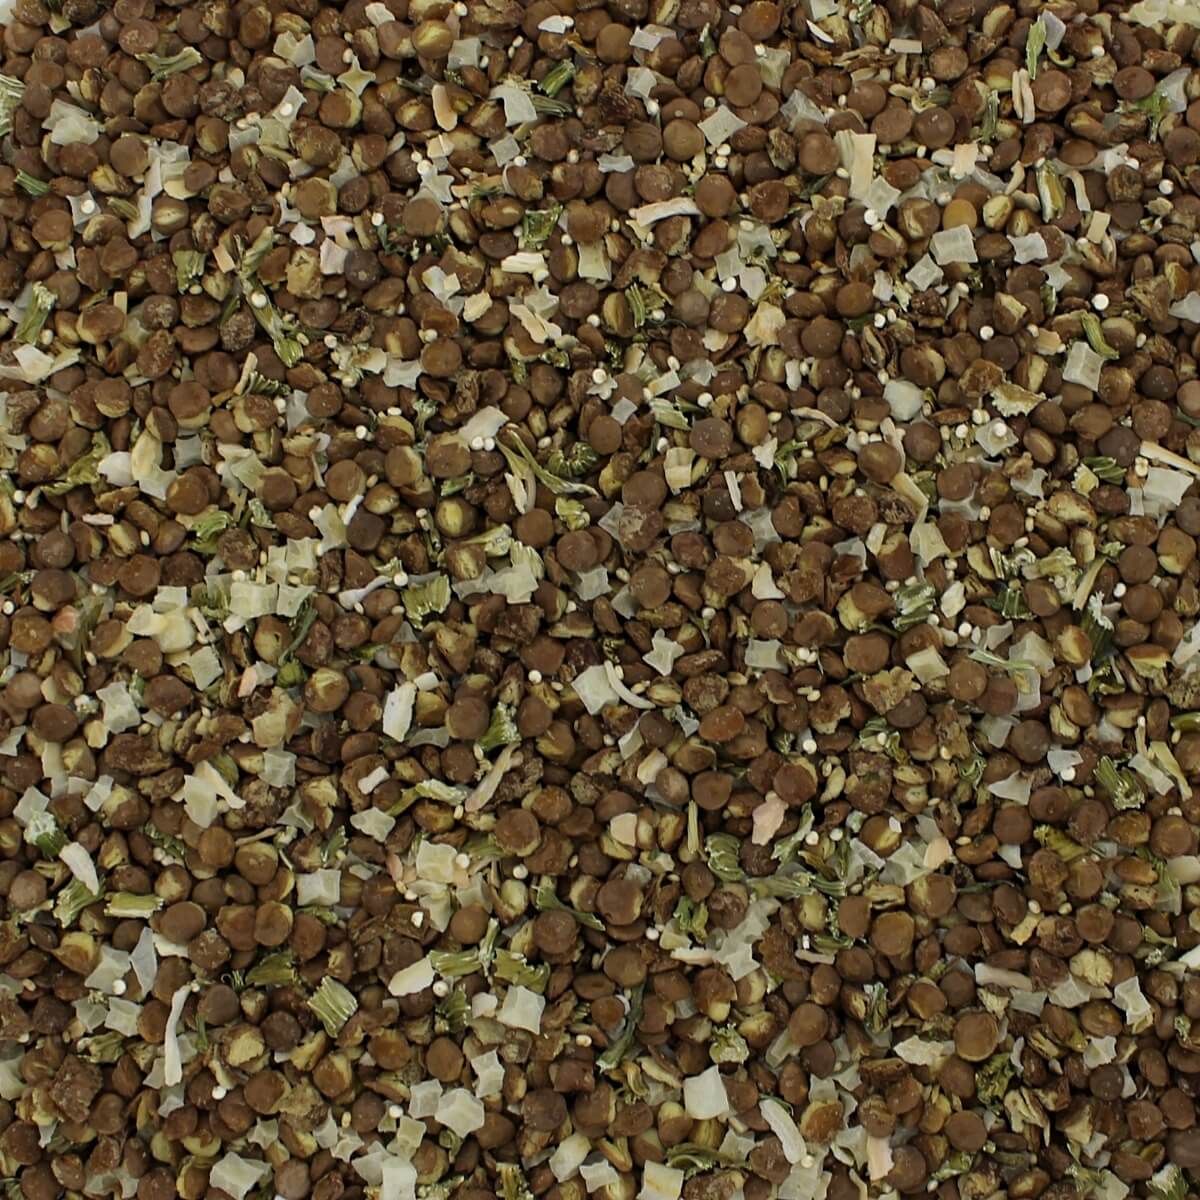 A close up image of a pile of brown seeds for Harmony House Soup and Chili Mix Sampler (12 ct) - (SHIPS IN 1-2 WEEKS).